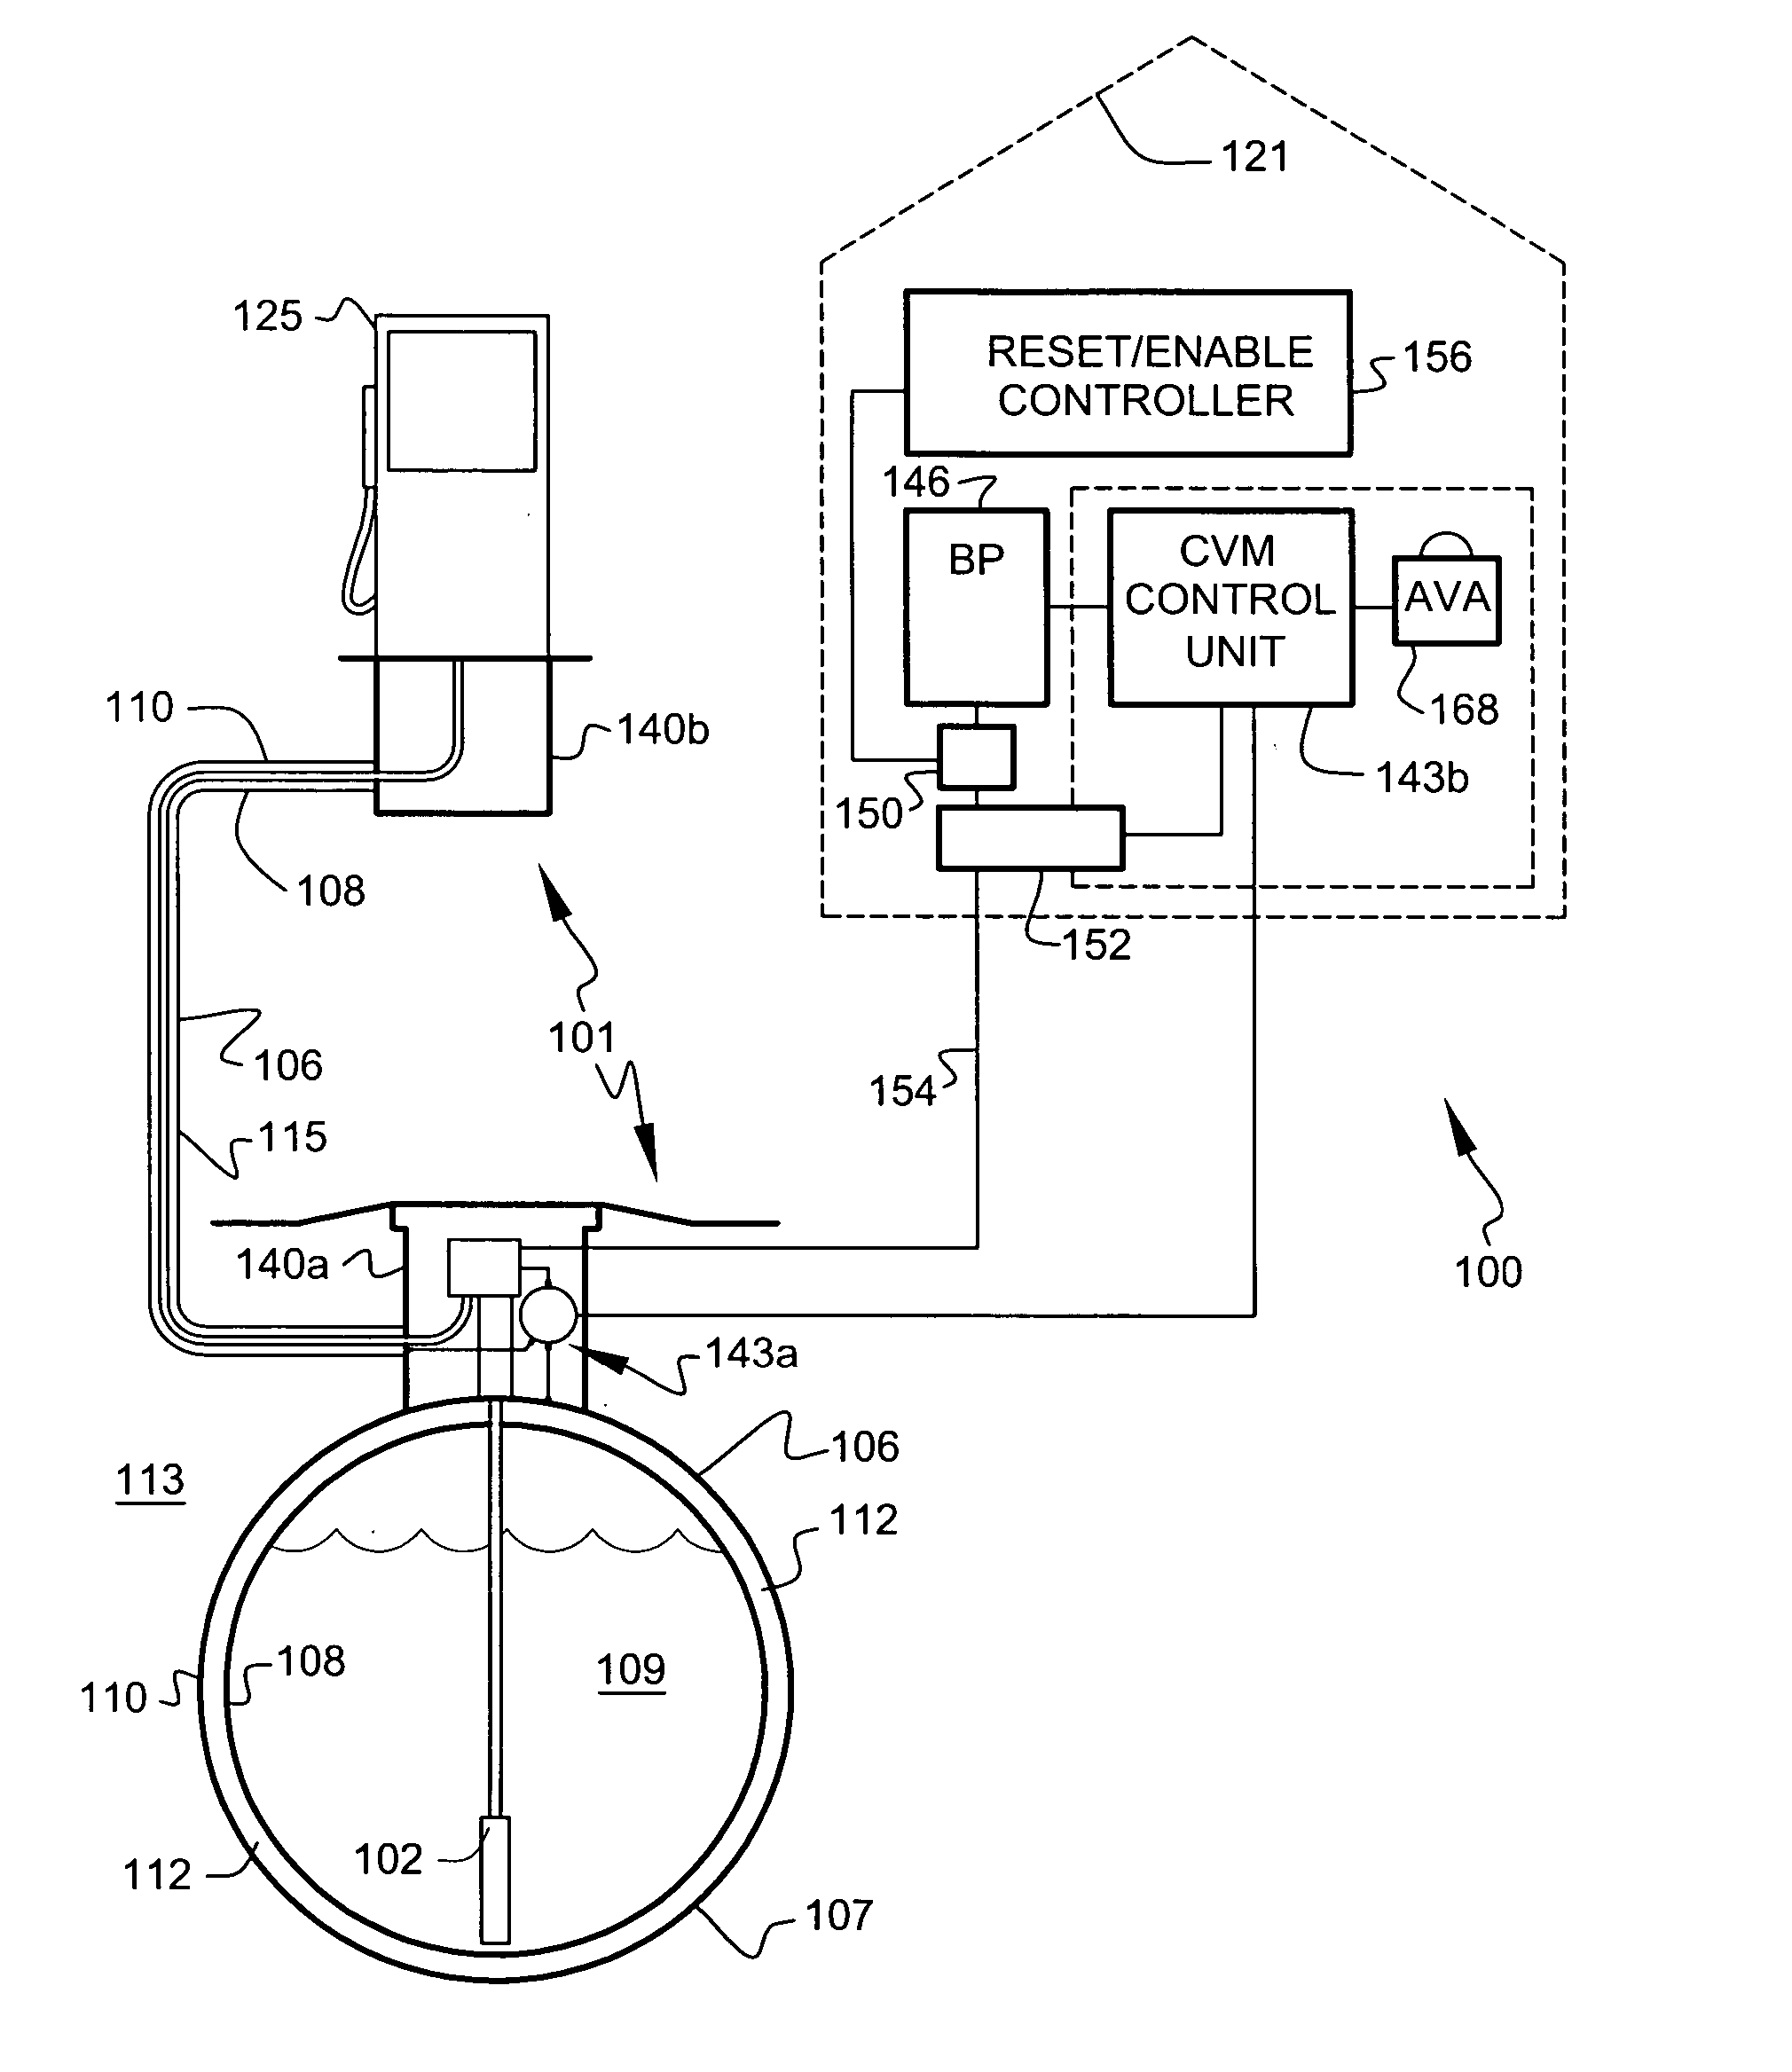 Secondary containment monitoring system